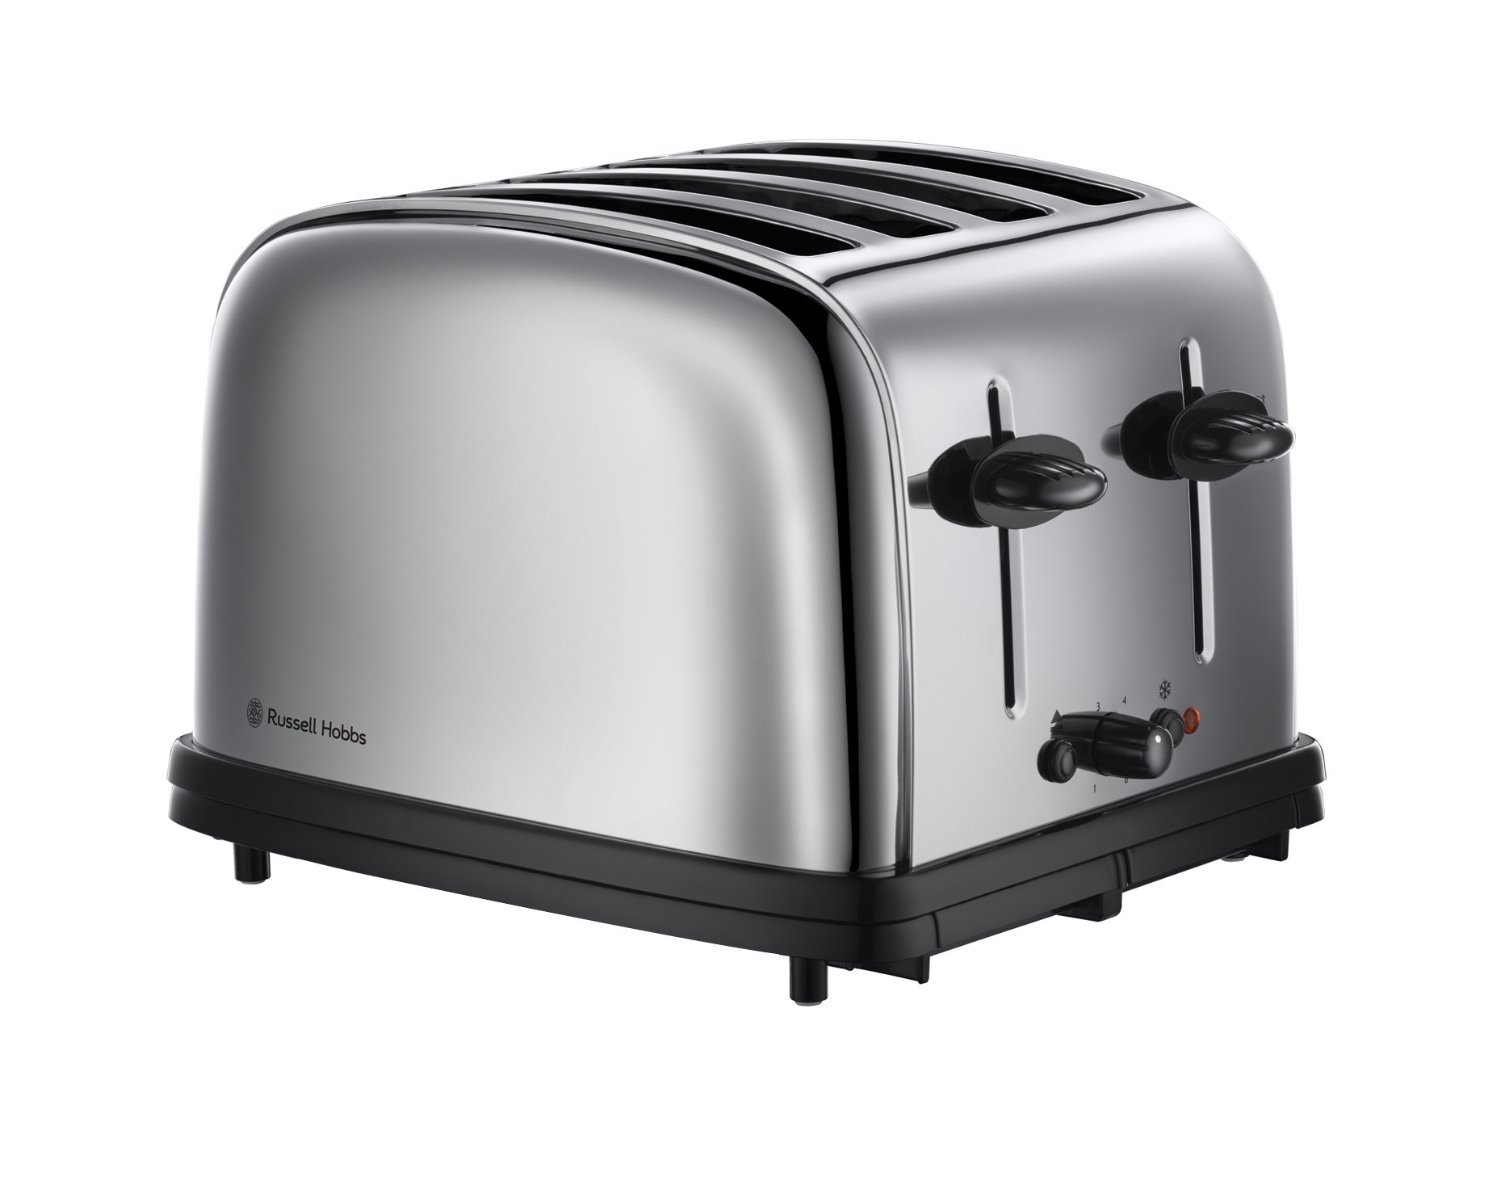 RUSSELL HOBBS Grille pain 13767 56 Inox 1800W 4 Fentes